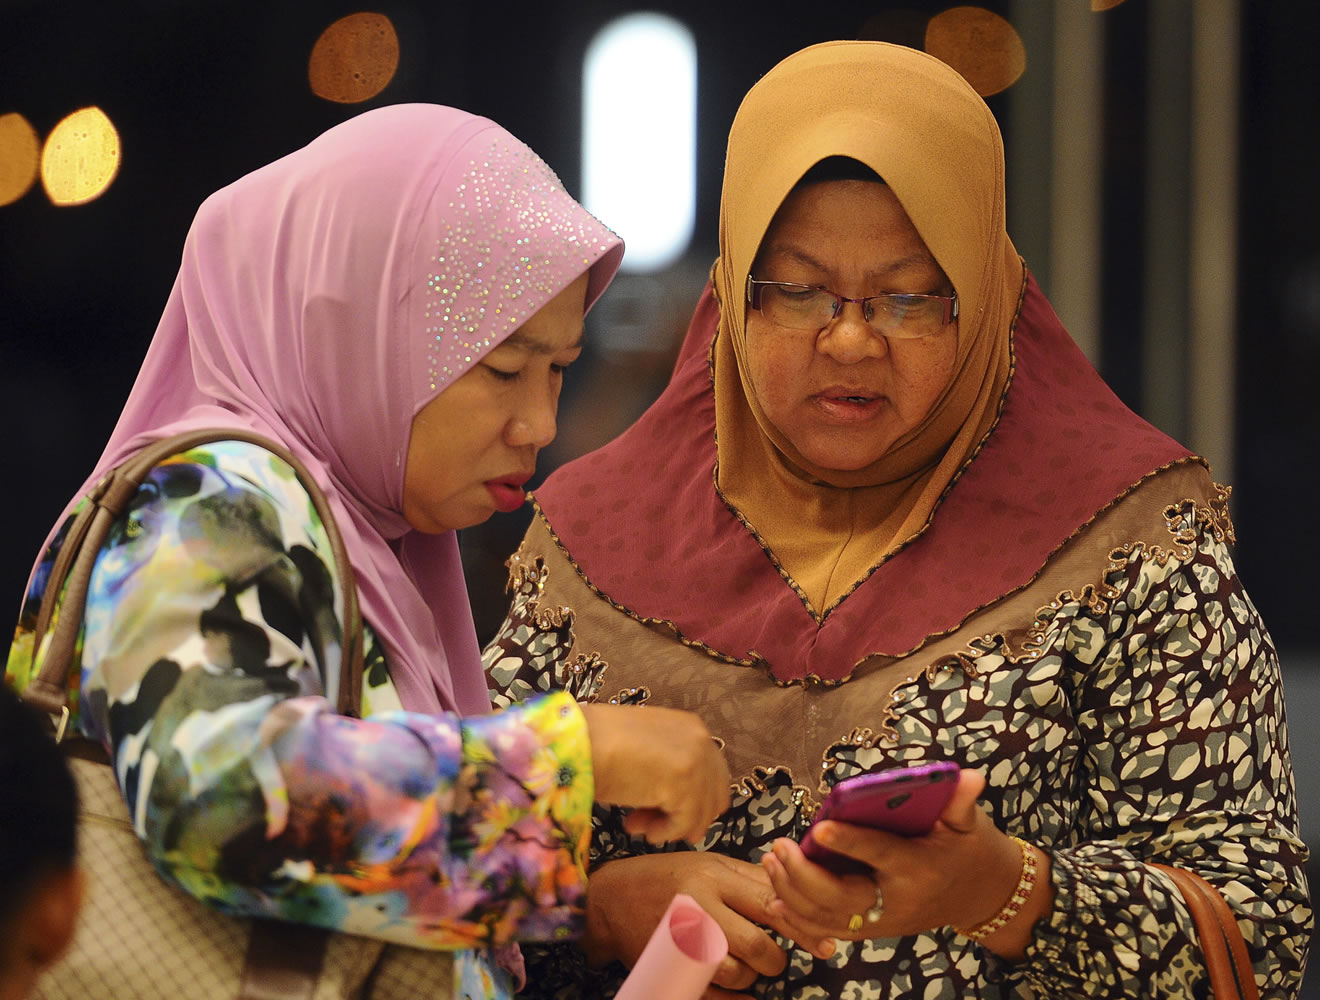 Family members of passengers aboard a missing Malaysia Airlines plane check a mobile phone before a briefing at a hotel in Putrajaya, Malaysia, on Tuesday.